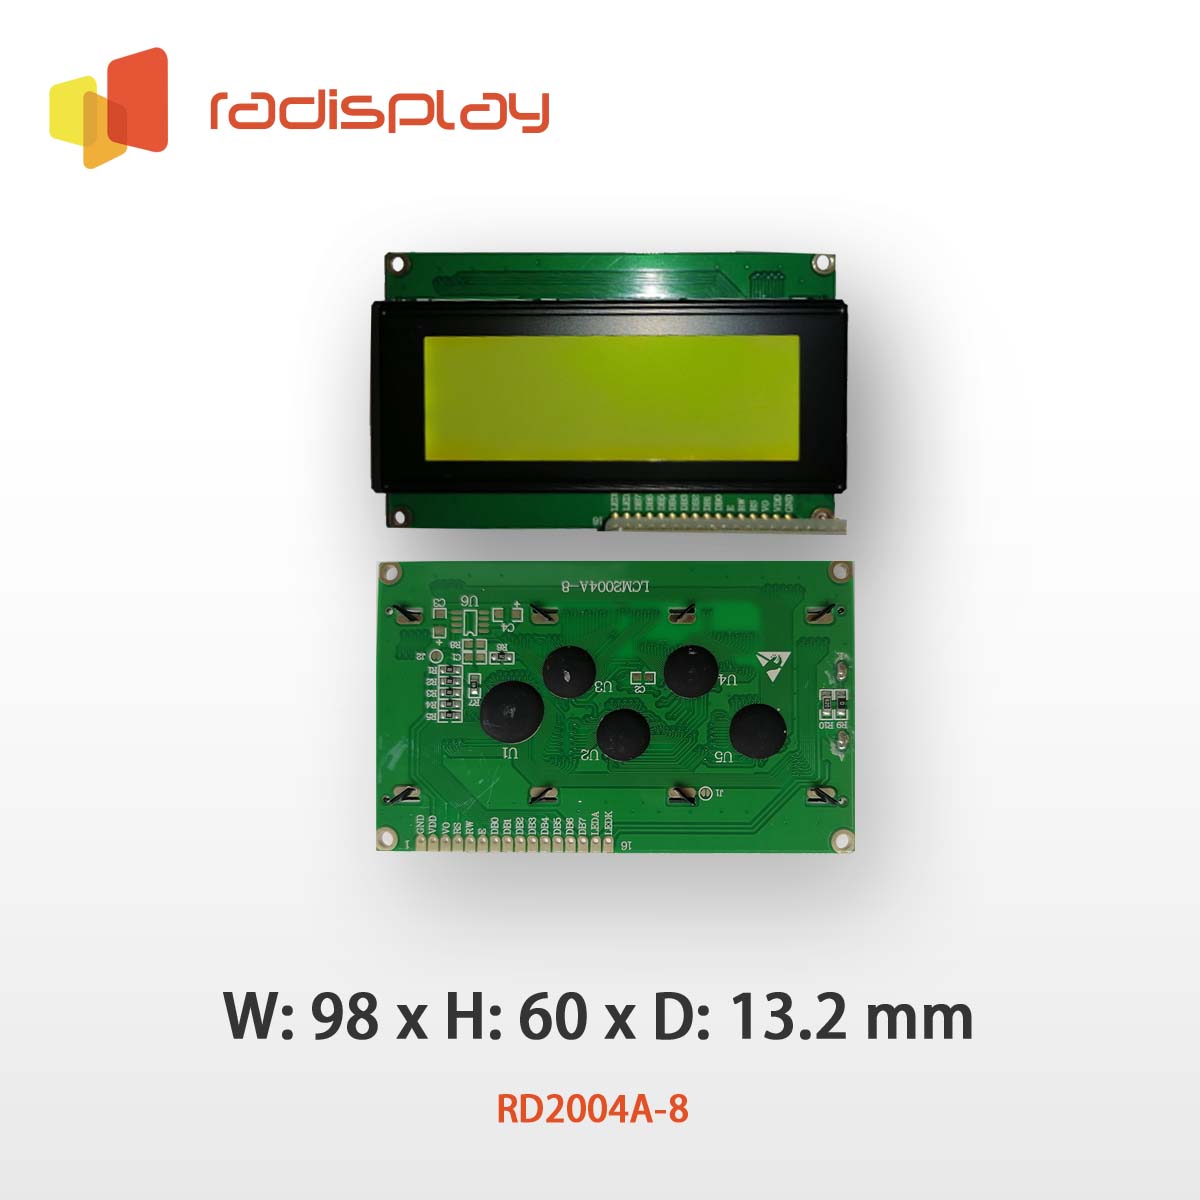 20x4 Character LCD Display Module (RD2004A-8)